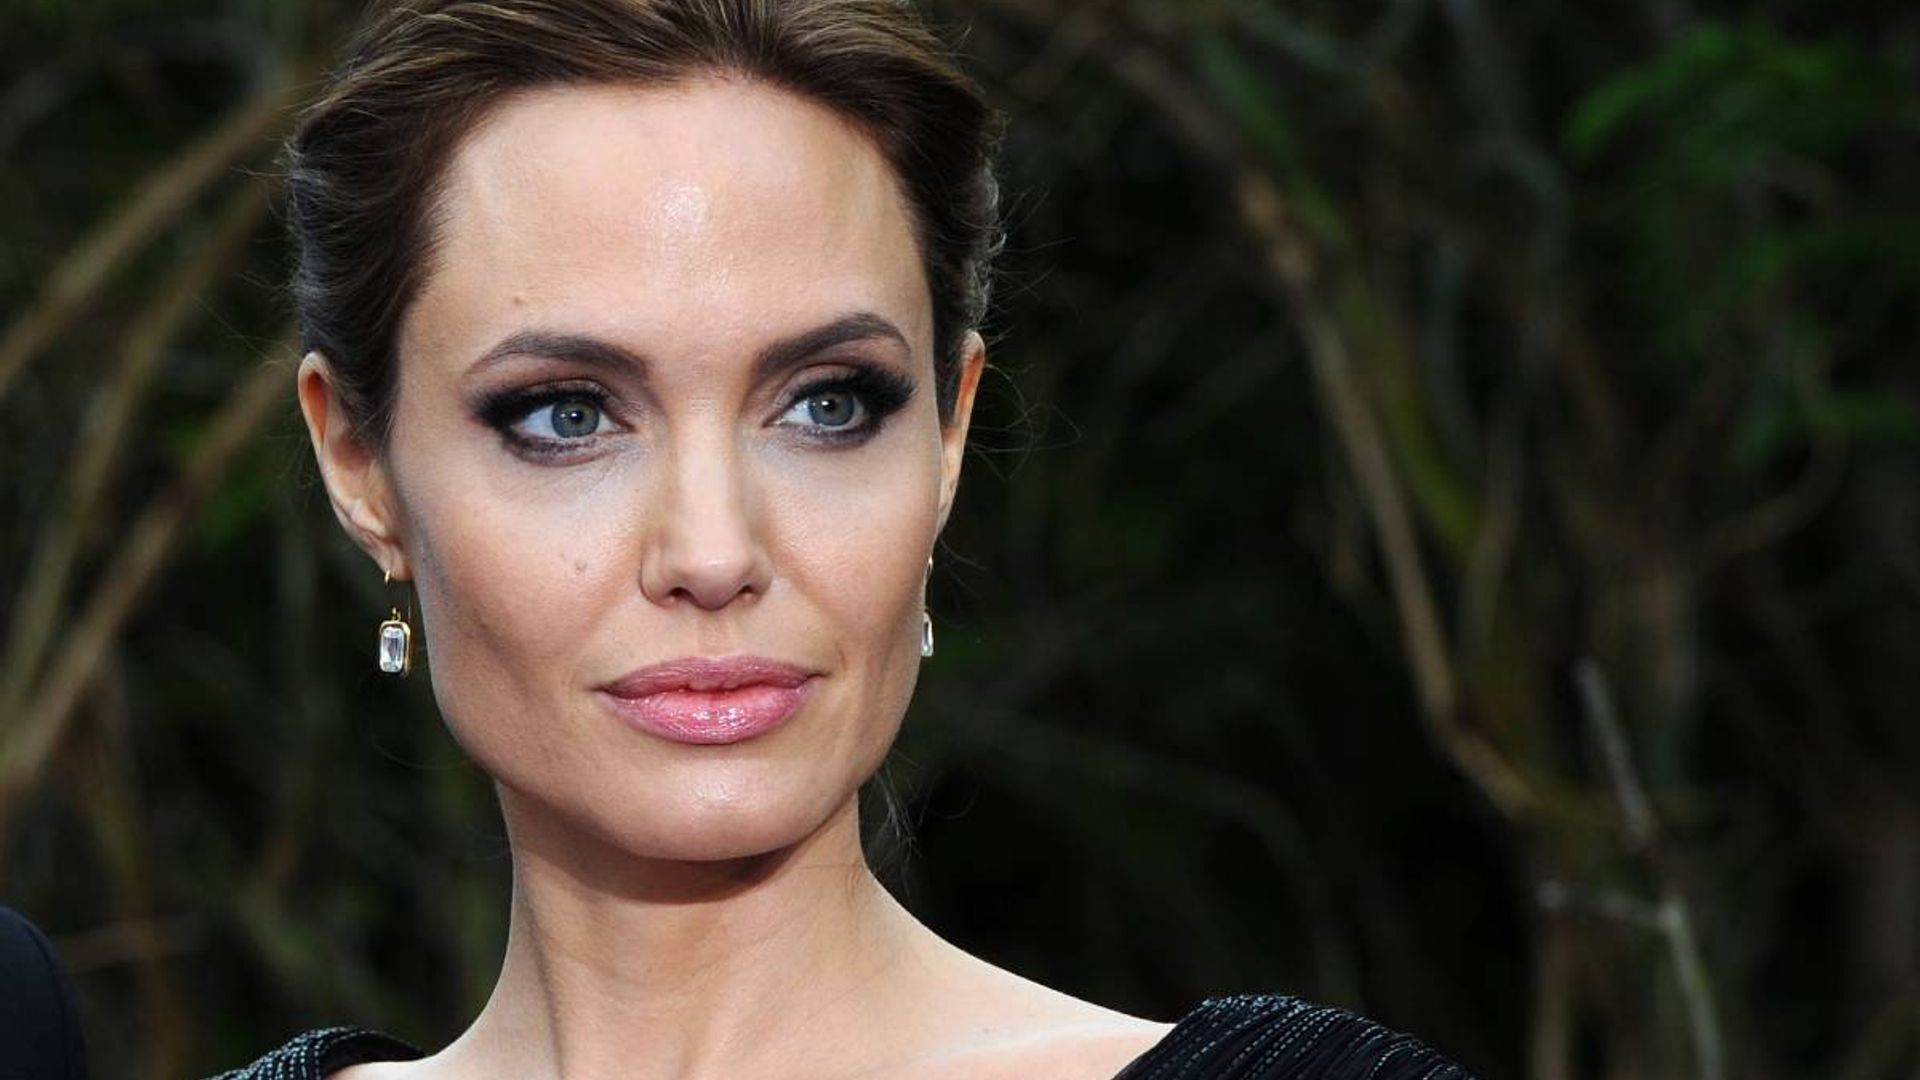 Angelina Jolie pens heartfelt message alongside photo of daughter Shiloh and son Pax